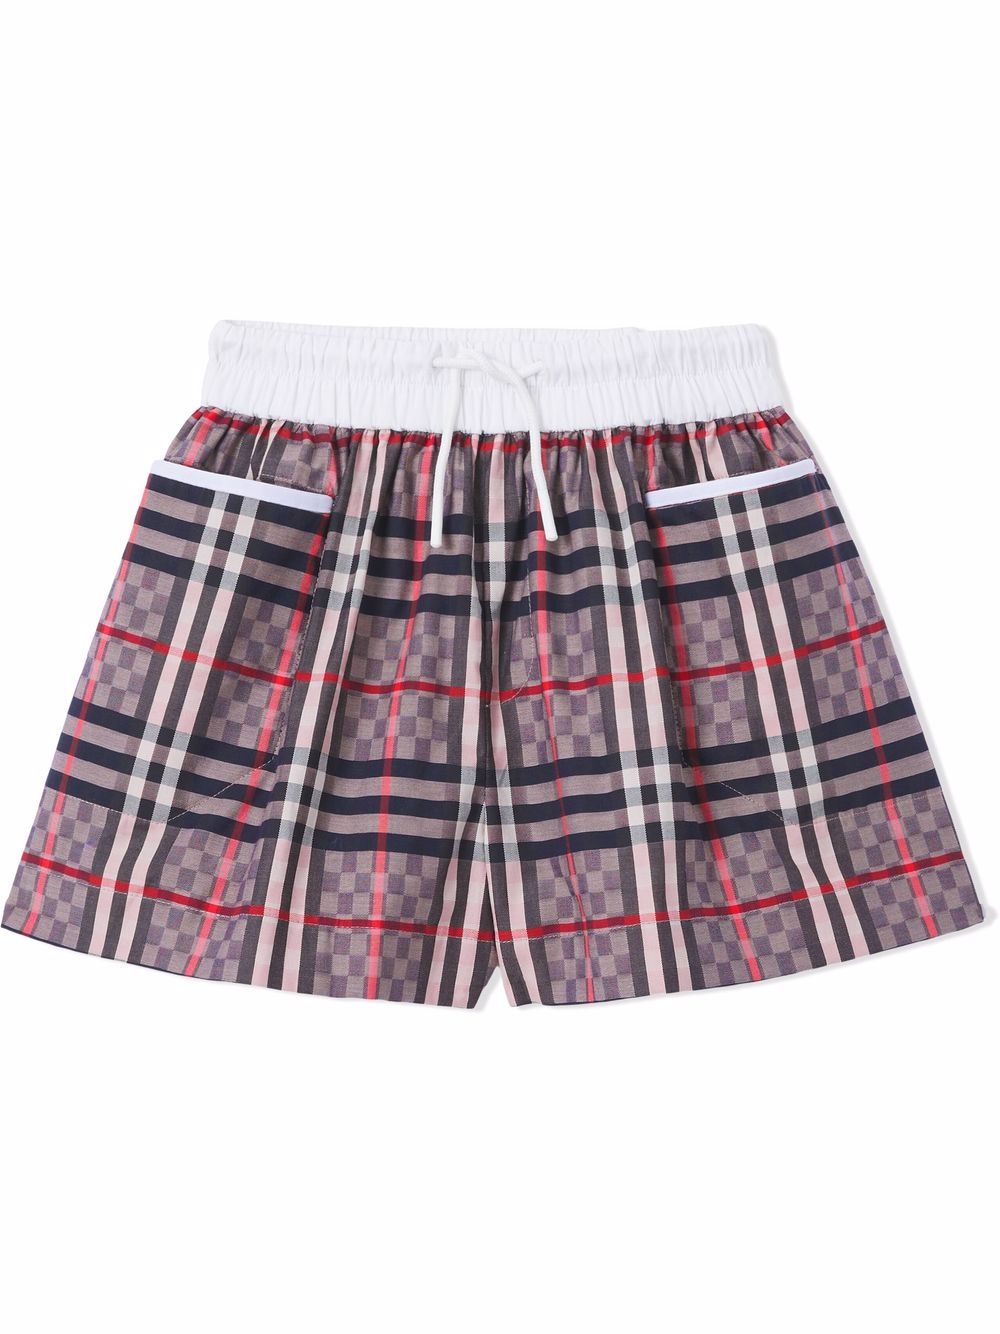 Image 1 of Burberry Kids Chequerboard Jacquard stretch shorts